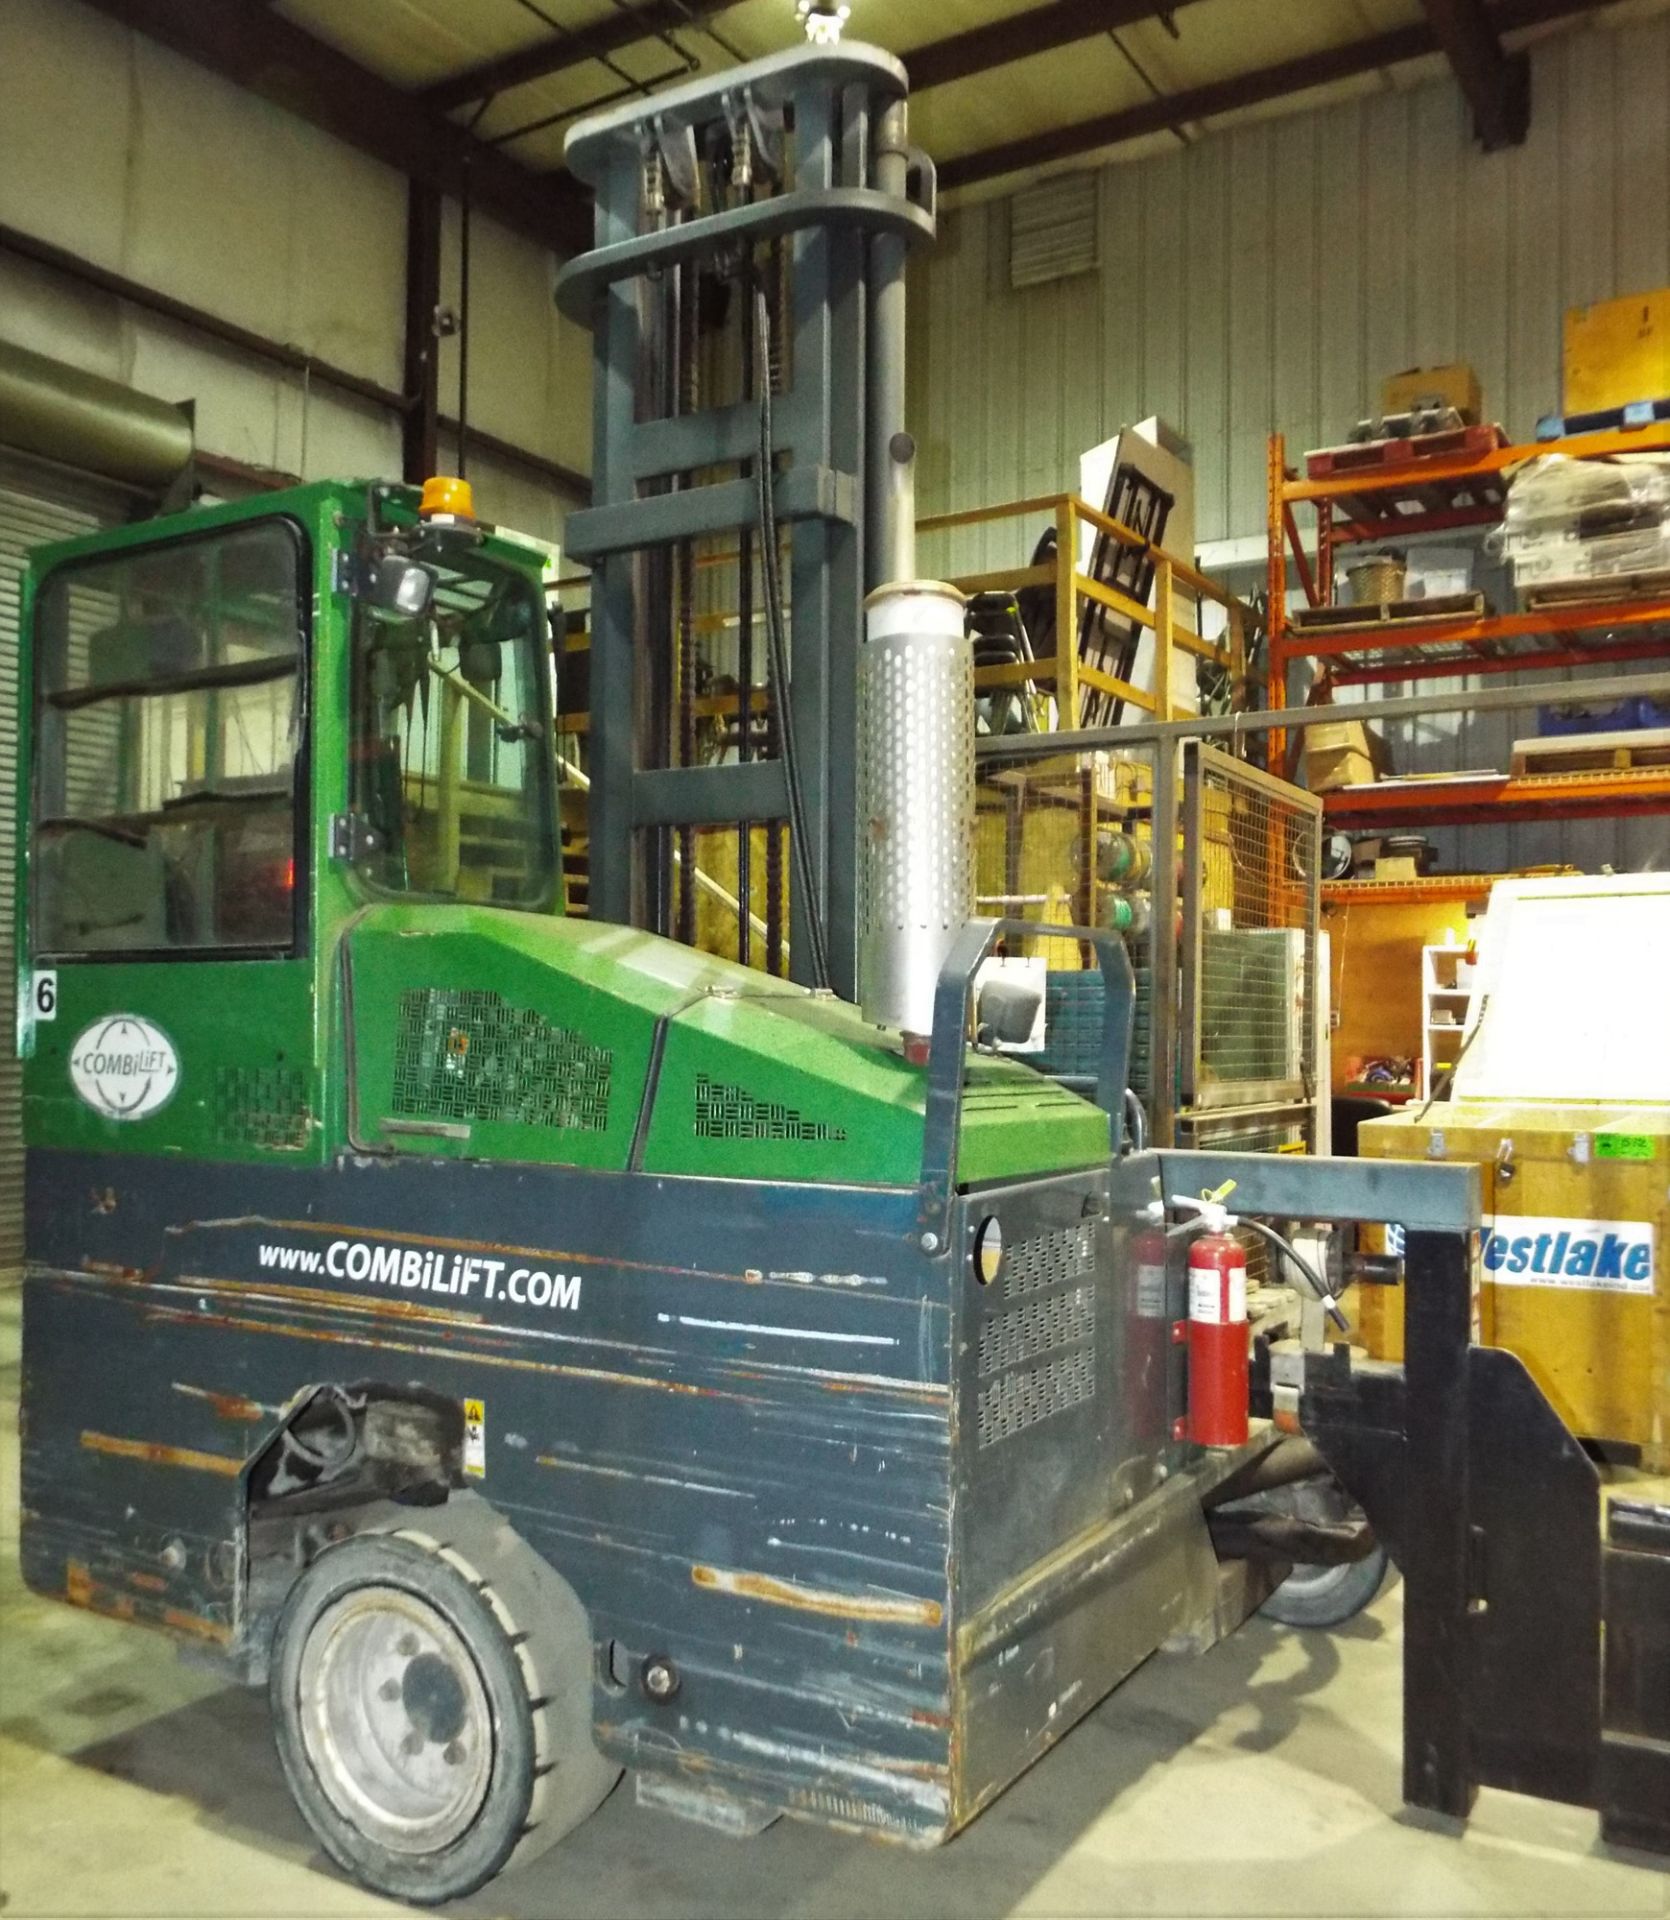 COMBI-LIFT (2006) CL22100LC48 LPG SIDE LOADER FORKLIFT WITH 10,000 LB. CAPACITY, 168" VERTICAL LIFT, - Image 3 of 9